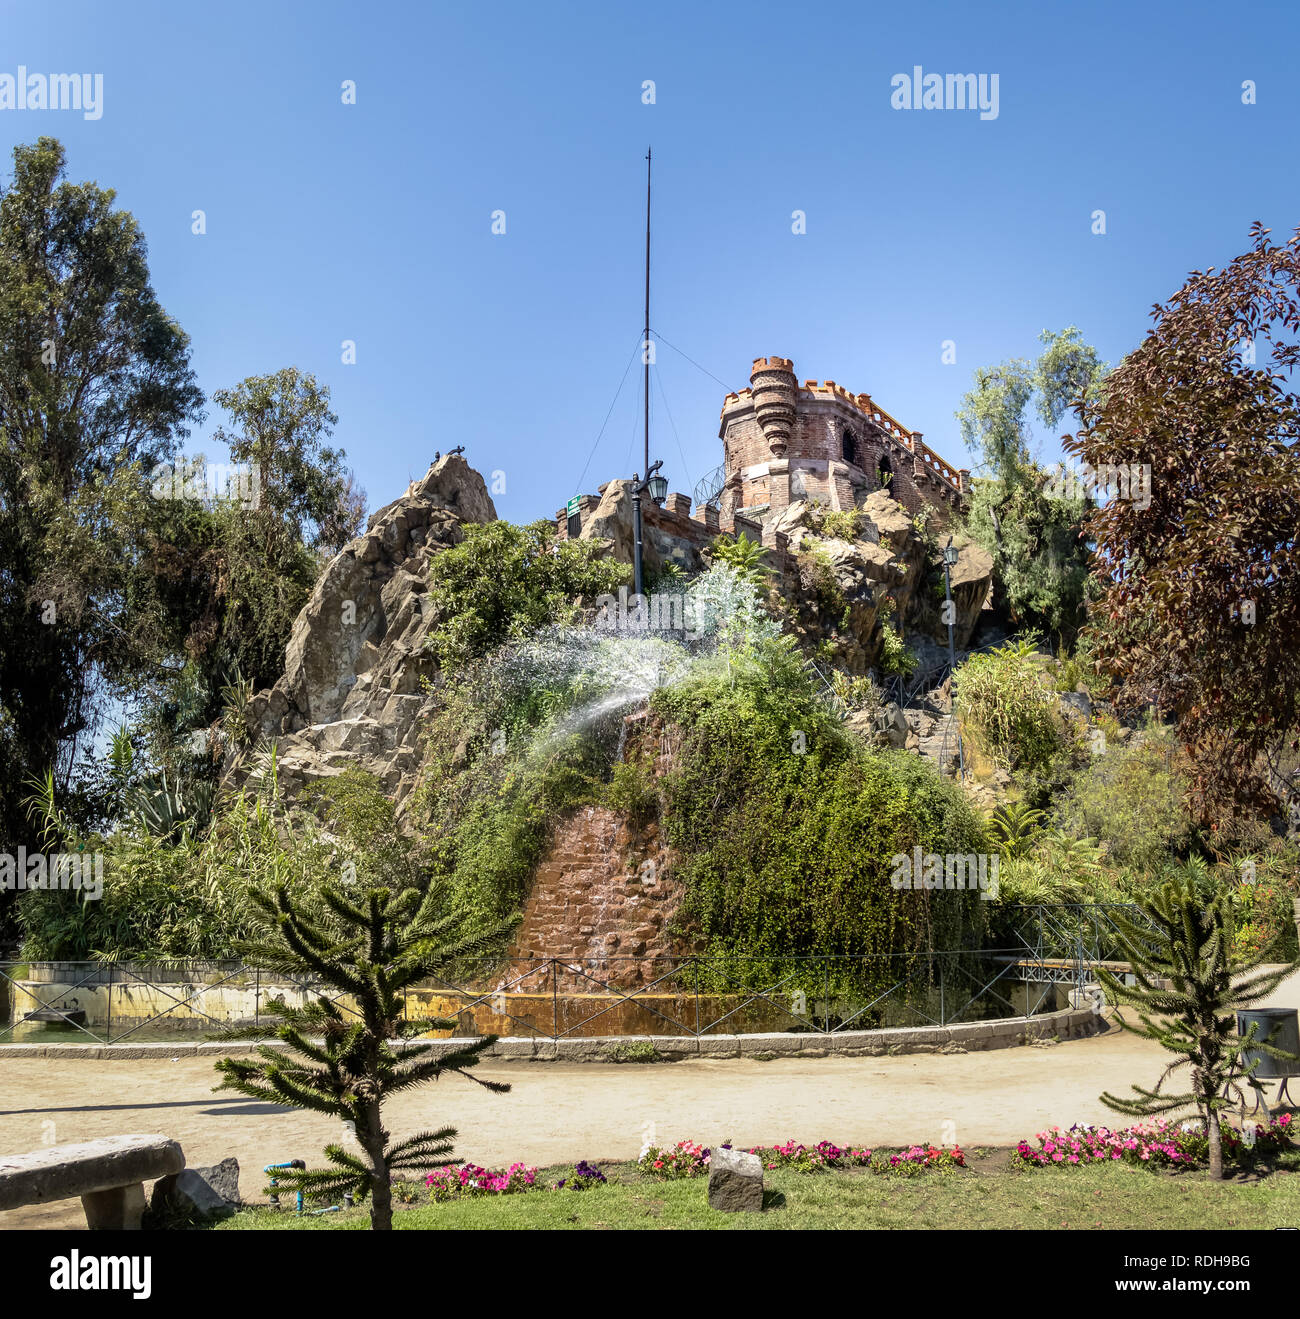 Viewpoint Tower and Fountain of Valdivia Square at Santa Lucia Hill - Santiago, Chile Stock Photo